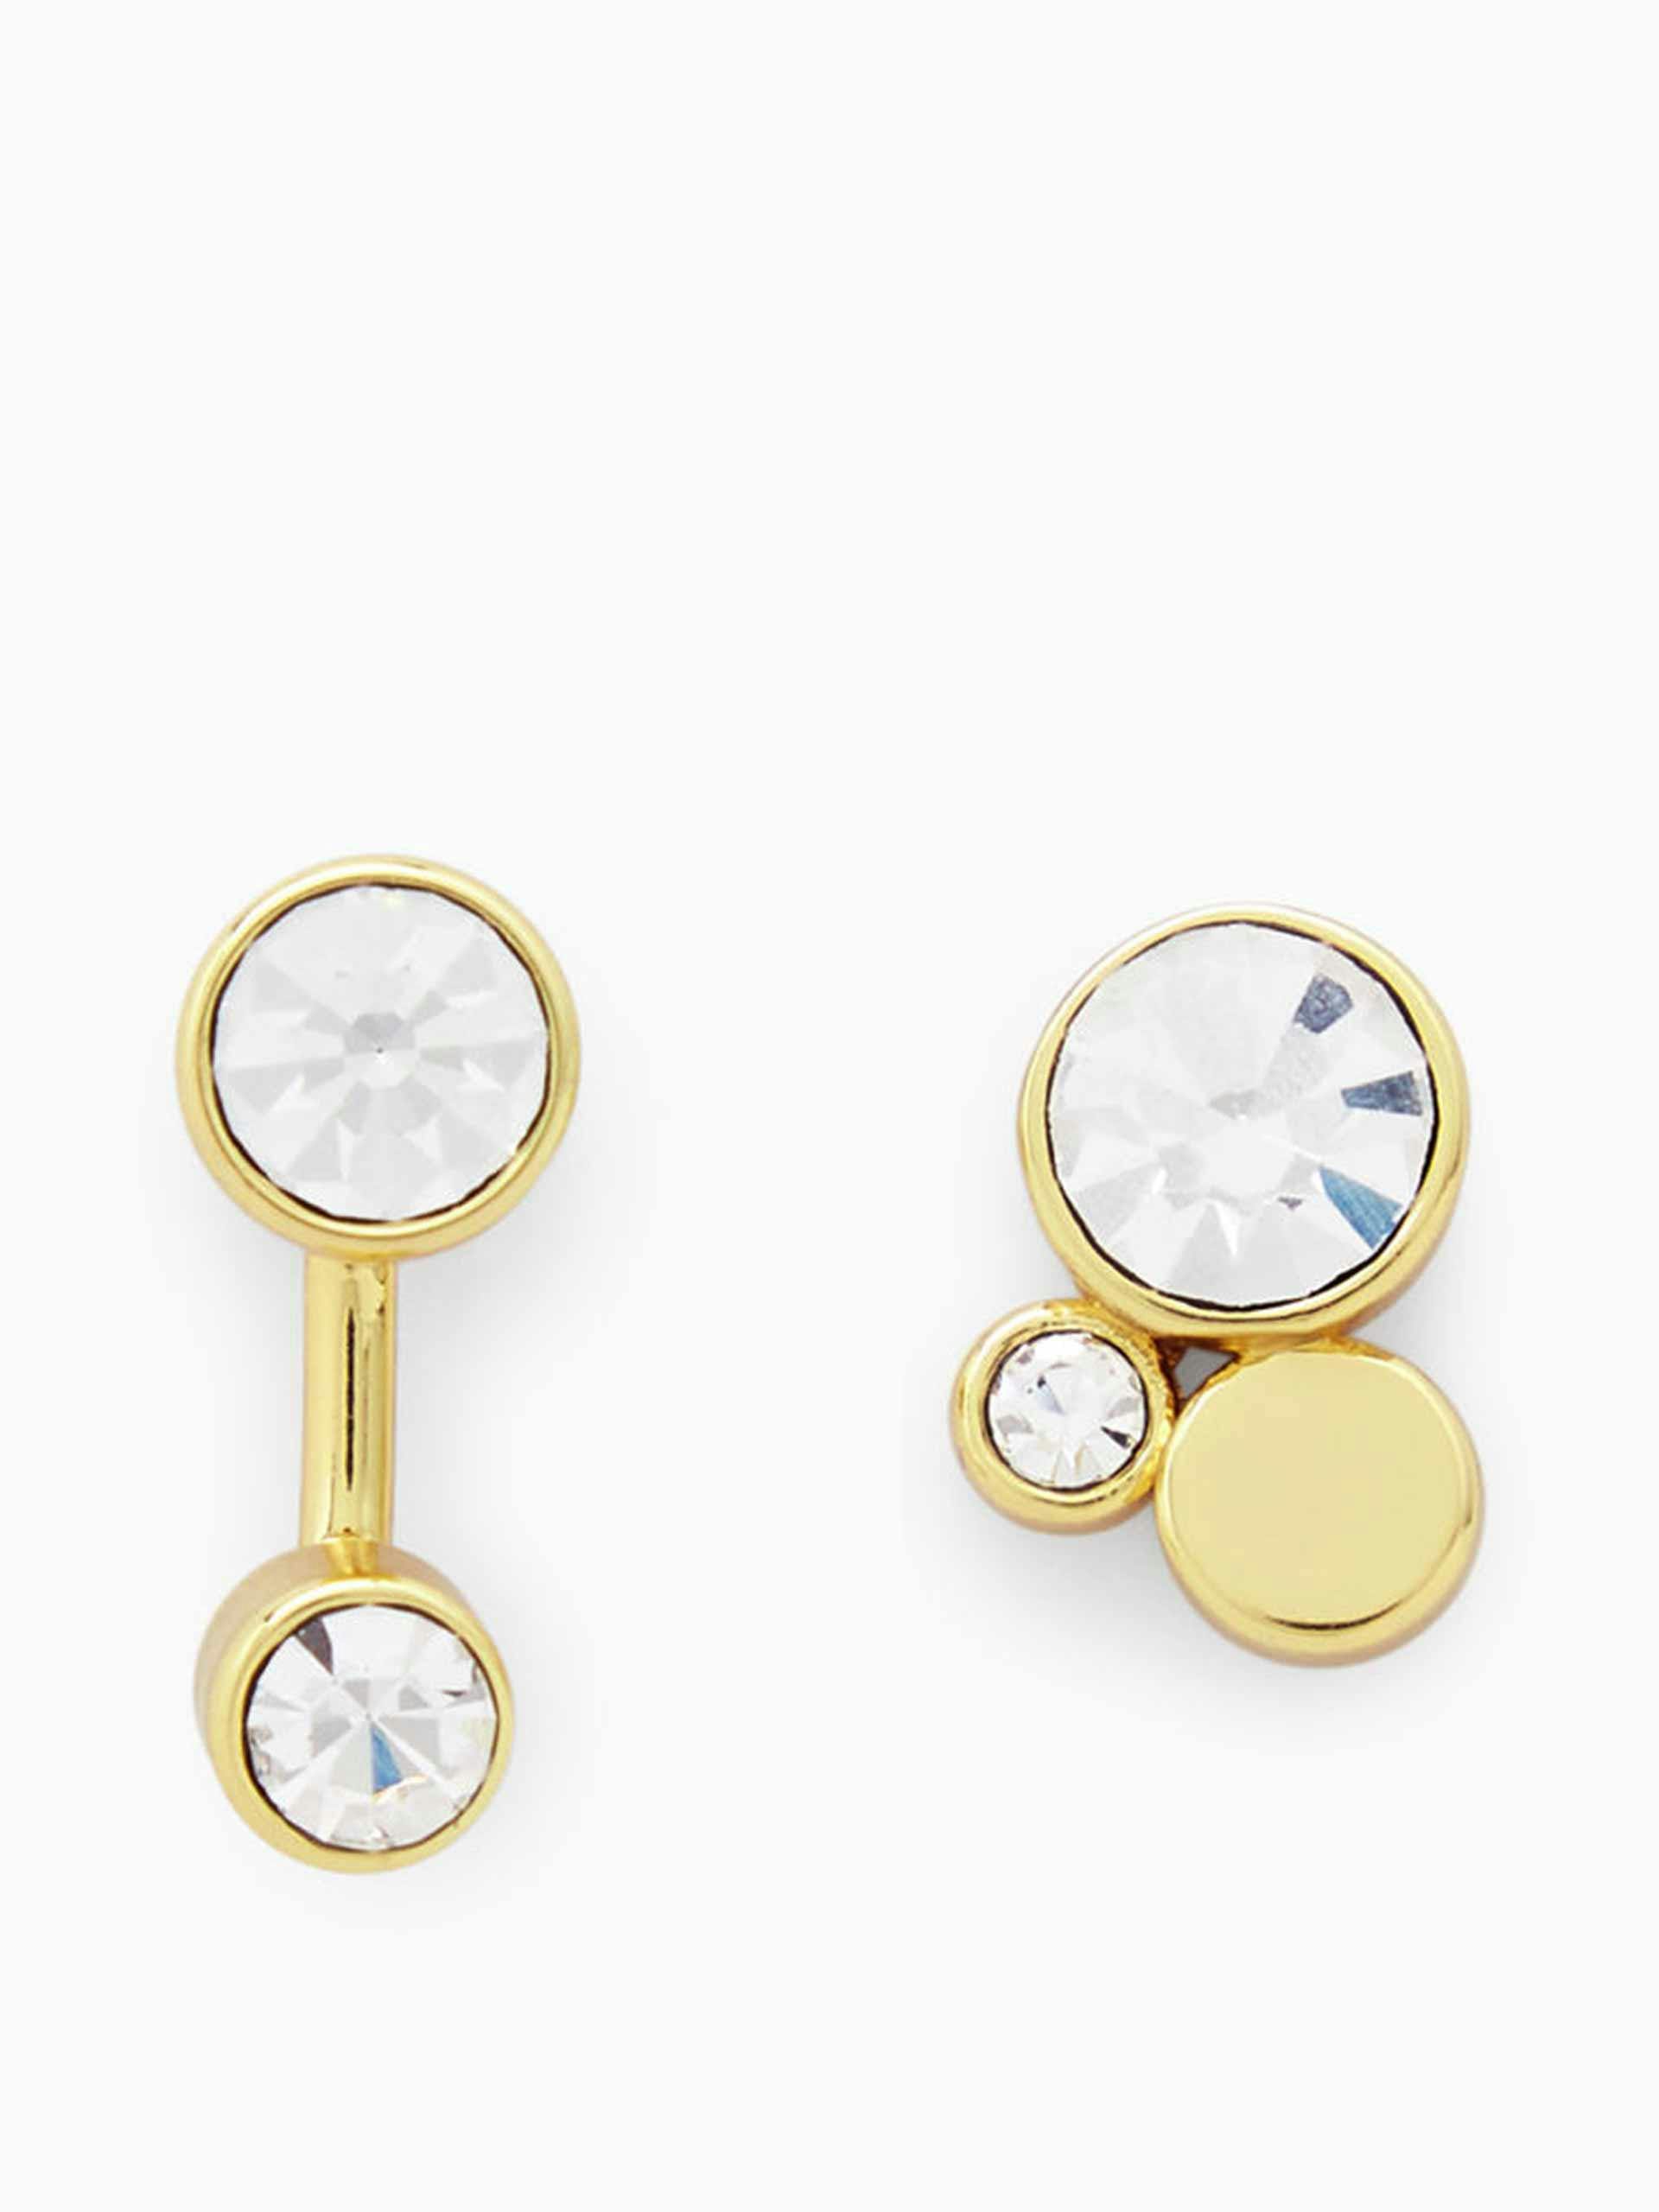 Mismatched gold and crystal stud earrings